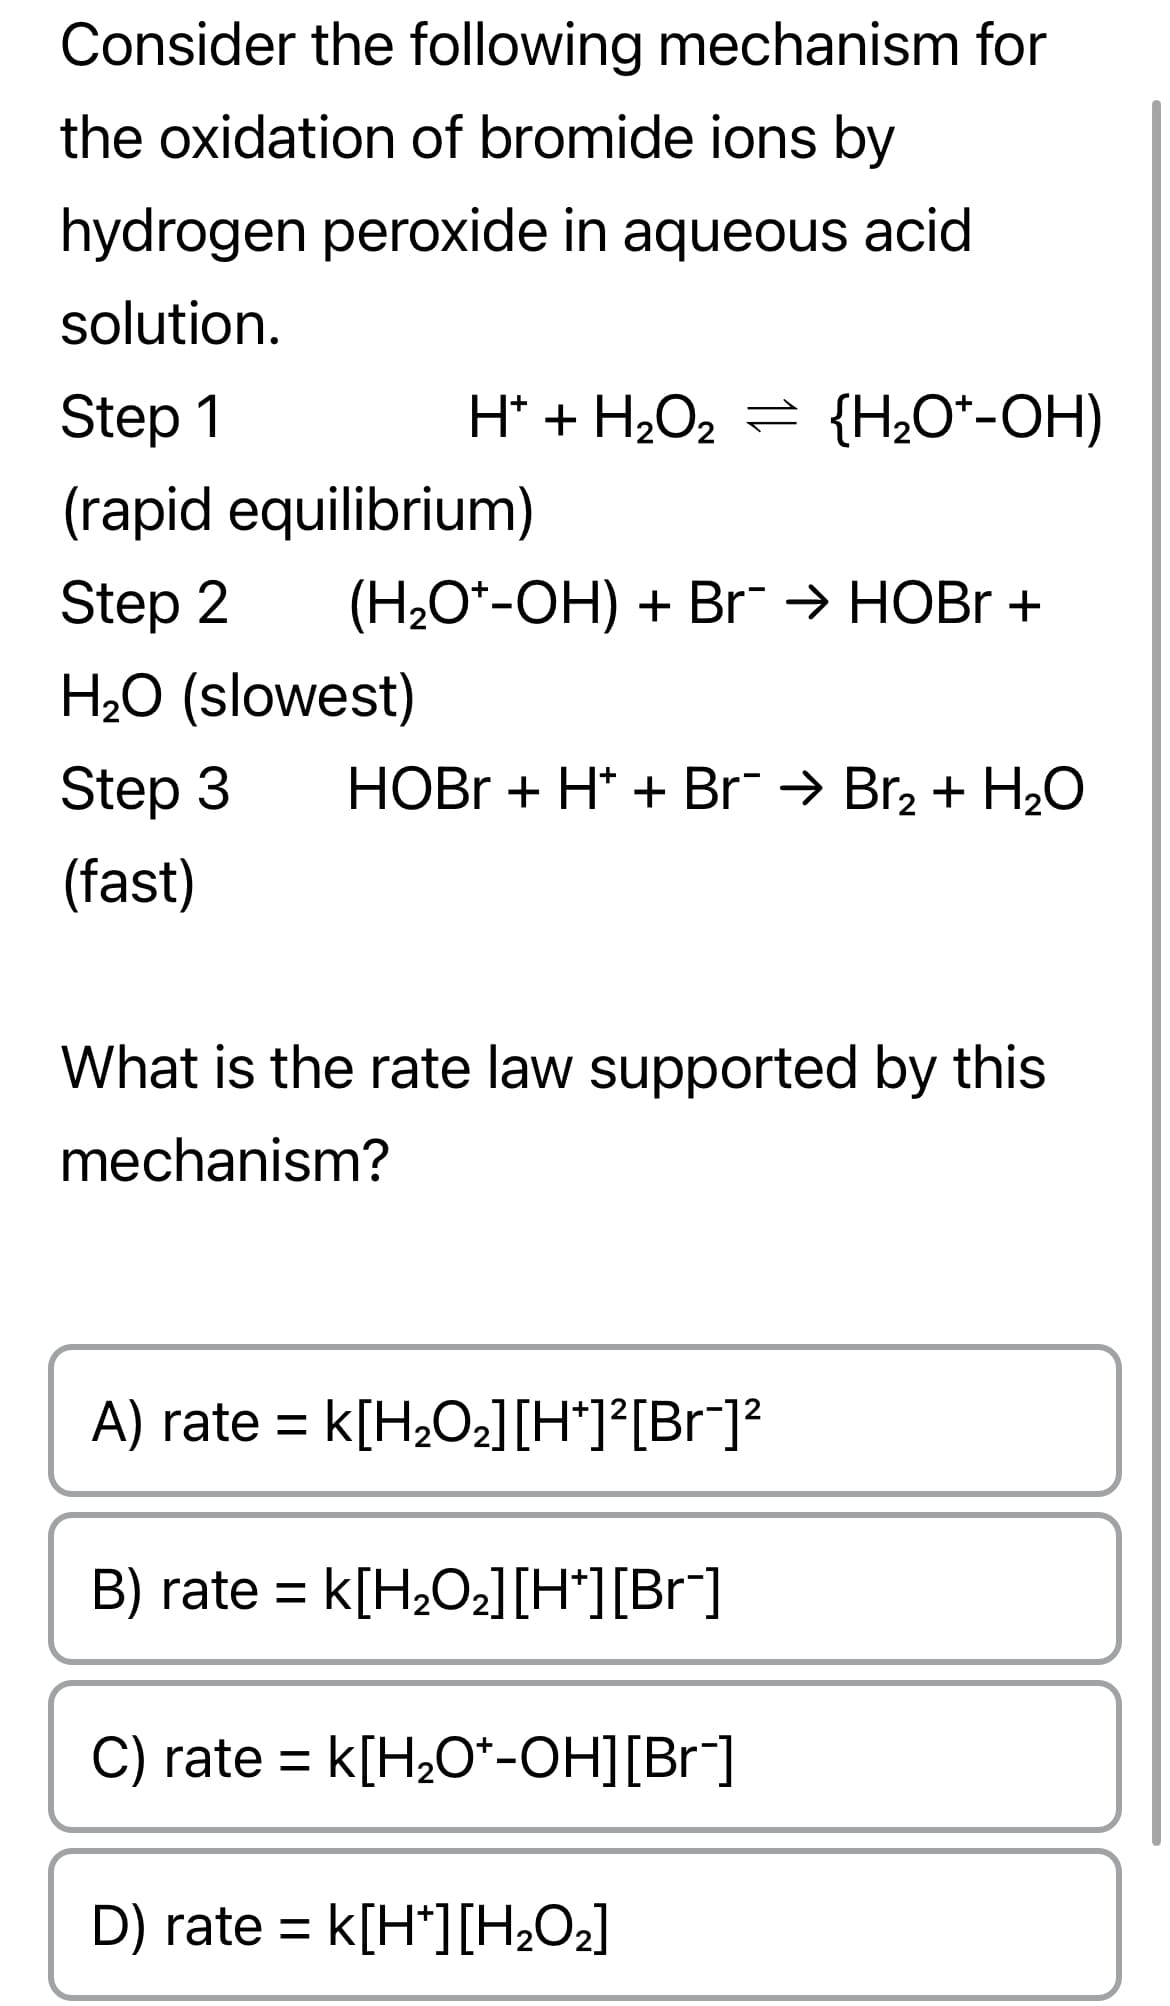 Consider the following mechanism for
the oxidation of bromide ions by
hydrogen peroxide in aqueous acid
solution.
Step 1
(rapid equilibrium)
Step 2 (H₂O*-OH) + Br¯ → HOBr +
H₂O (slowest)
Step 3
(fast)
H* + H₂O₂ = {H₂O*-OH)
HOBr + H* + Br¯ → Br₂ + H₂O
What is the rate law supported by this
mechanism?
A) rate = K[H₂O₂] [H*]²[Br¯]²
B) rate = K[H₂O₂] [H*][Br¯]
C) rate = k[H₂O*-OH][Br¯]
D) rate = K[H*][H₂O₂]